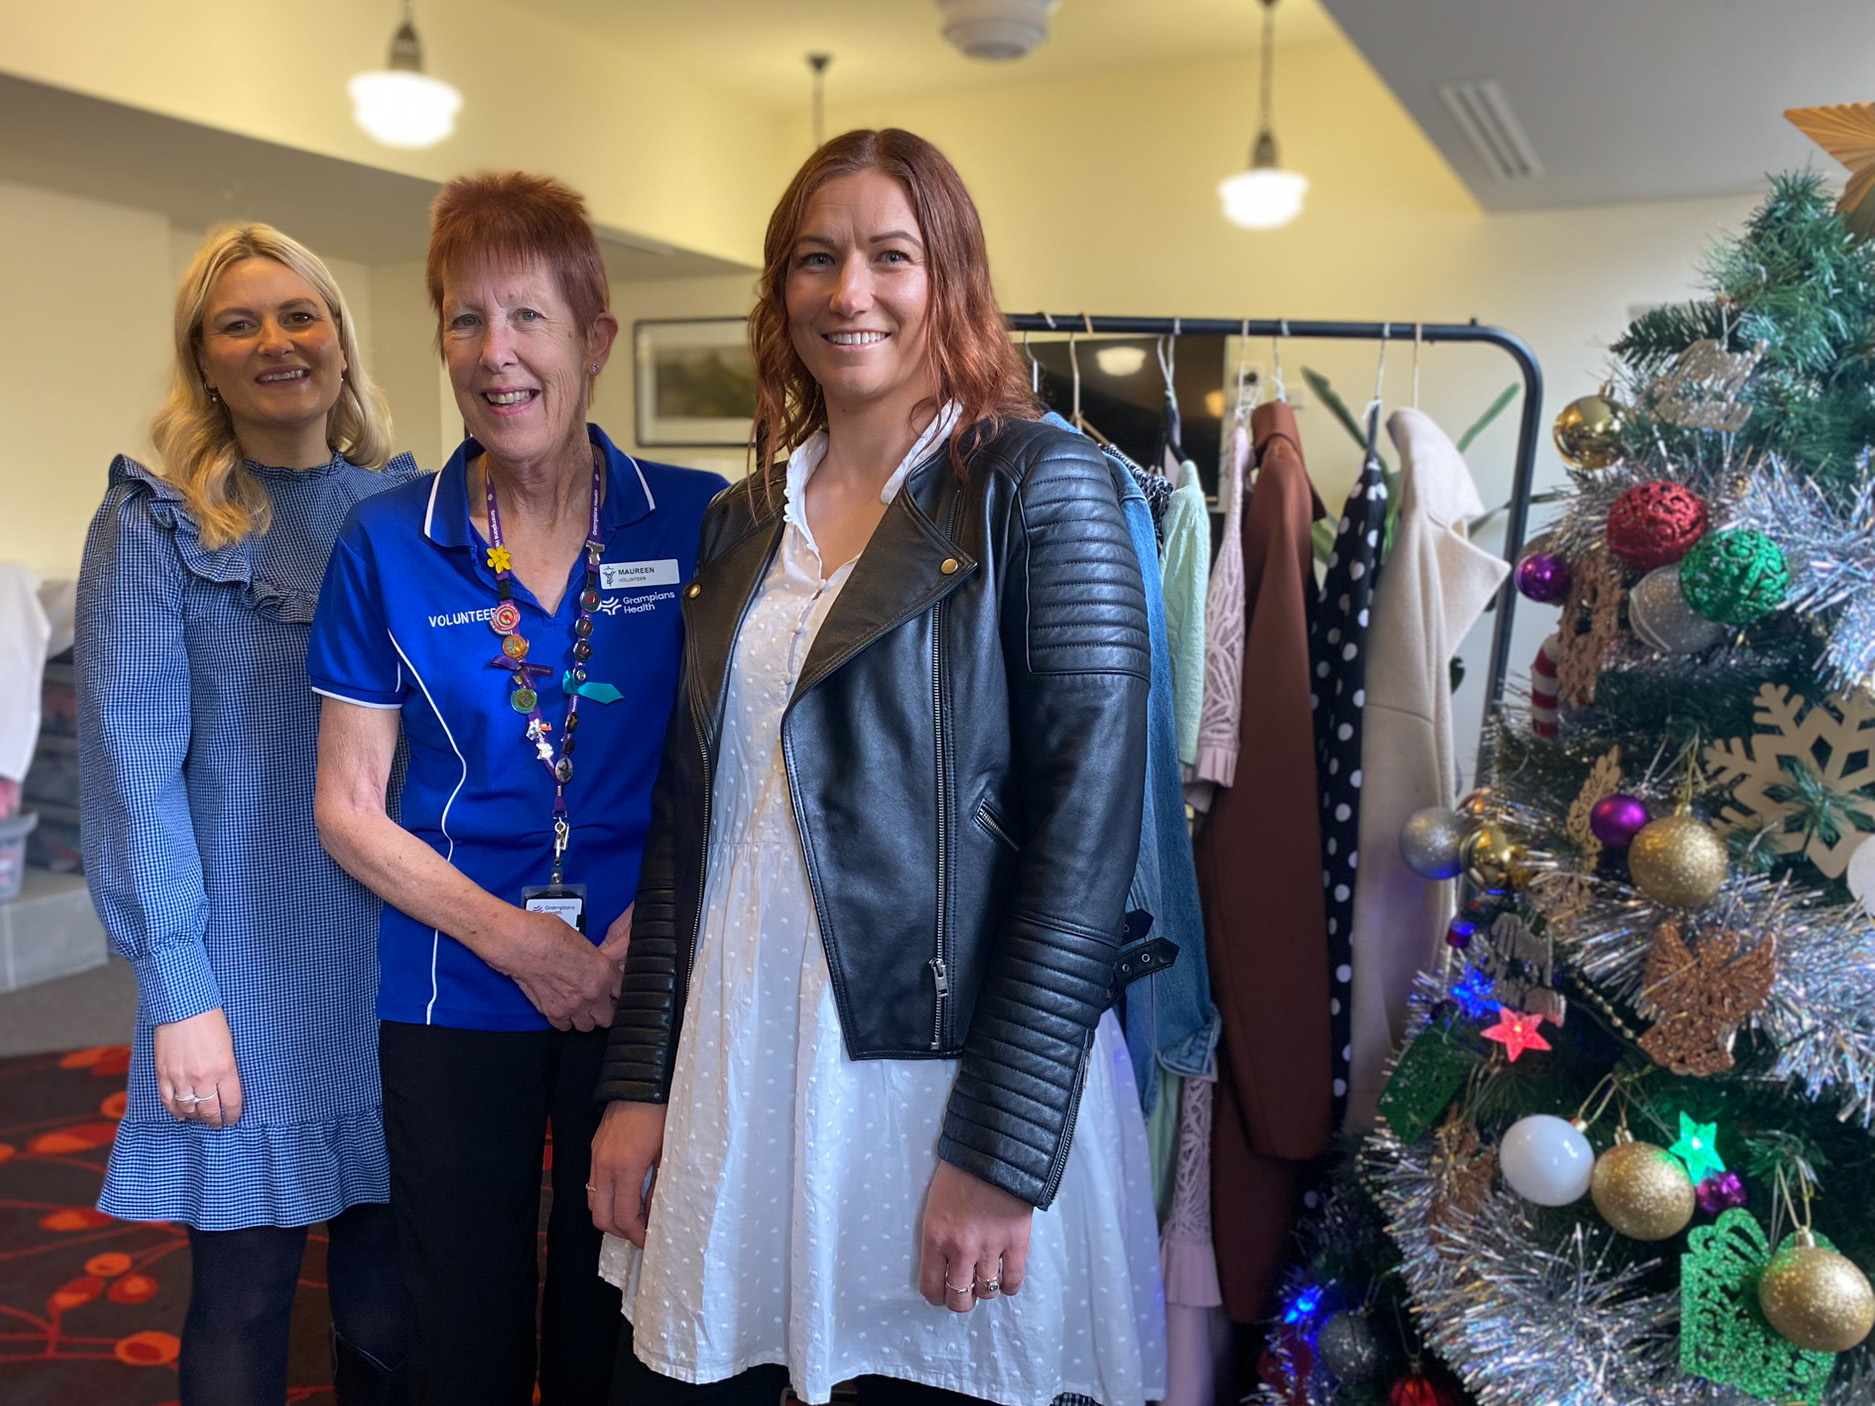 Reworn and Grampians Health Wellness Centre partner for second annual Charity Christmas Market